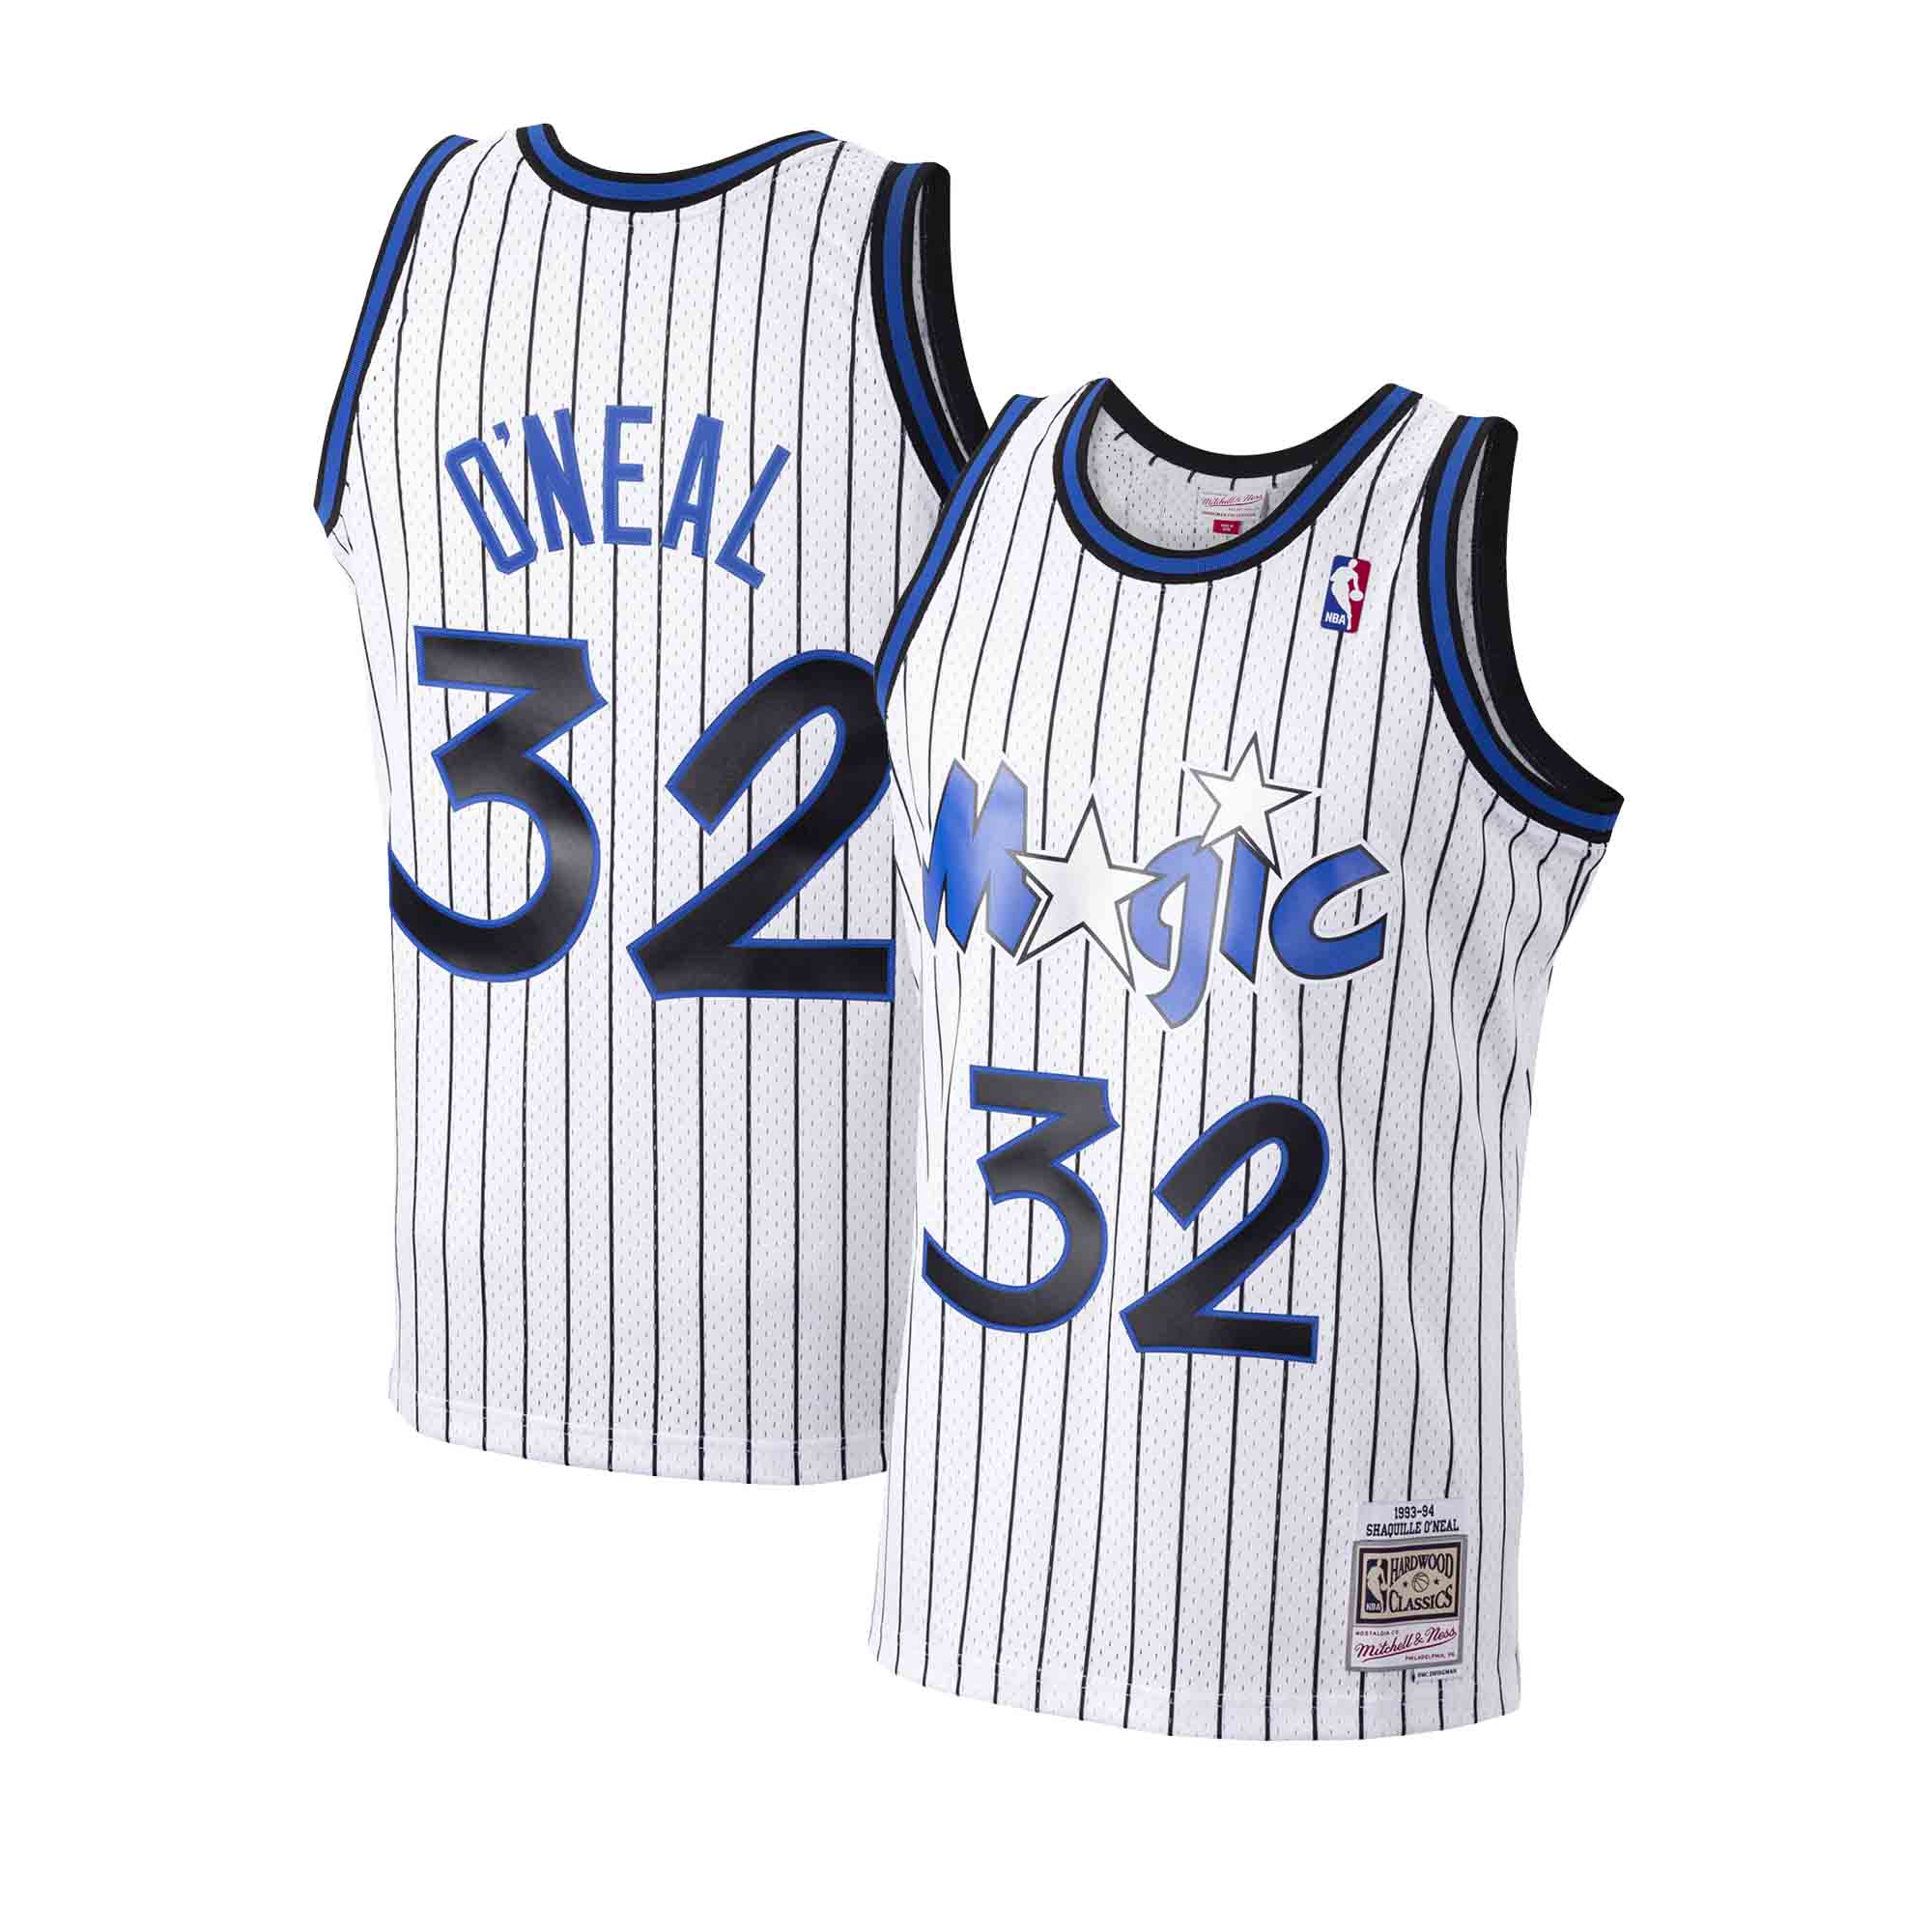  Orlando Magic Shaquille O'Neal Youth Swingman Jersey (YTH :  Clothing, Shoes & Jewelry